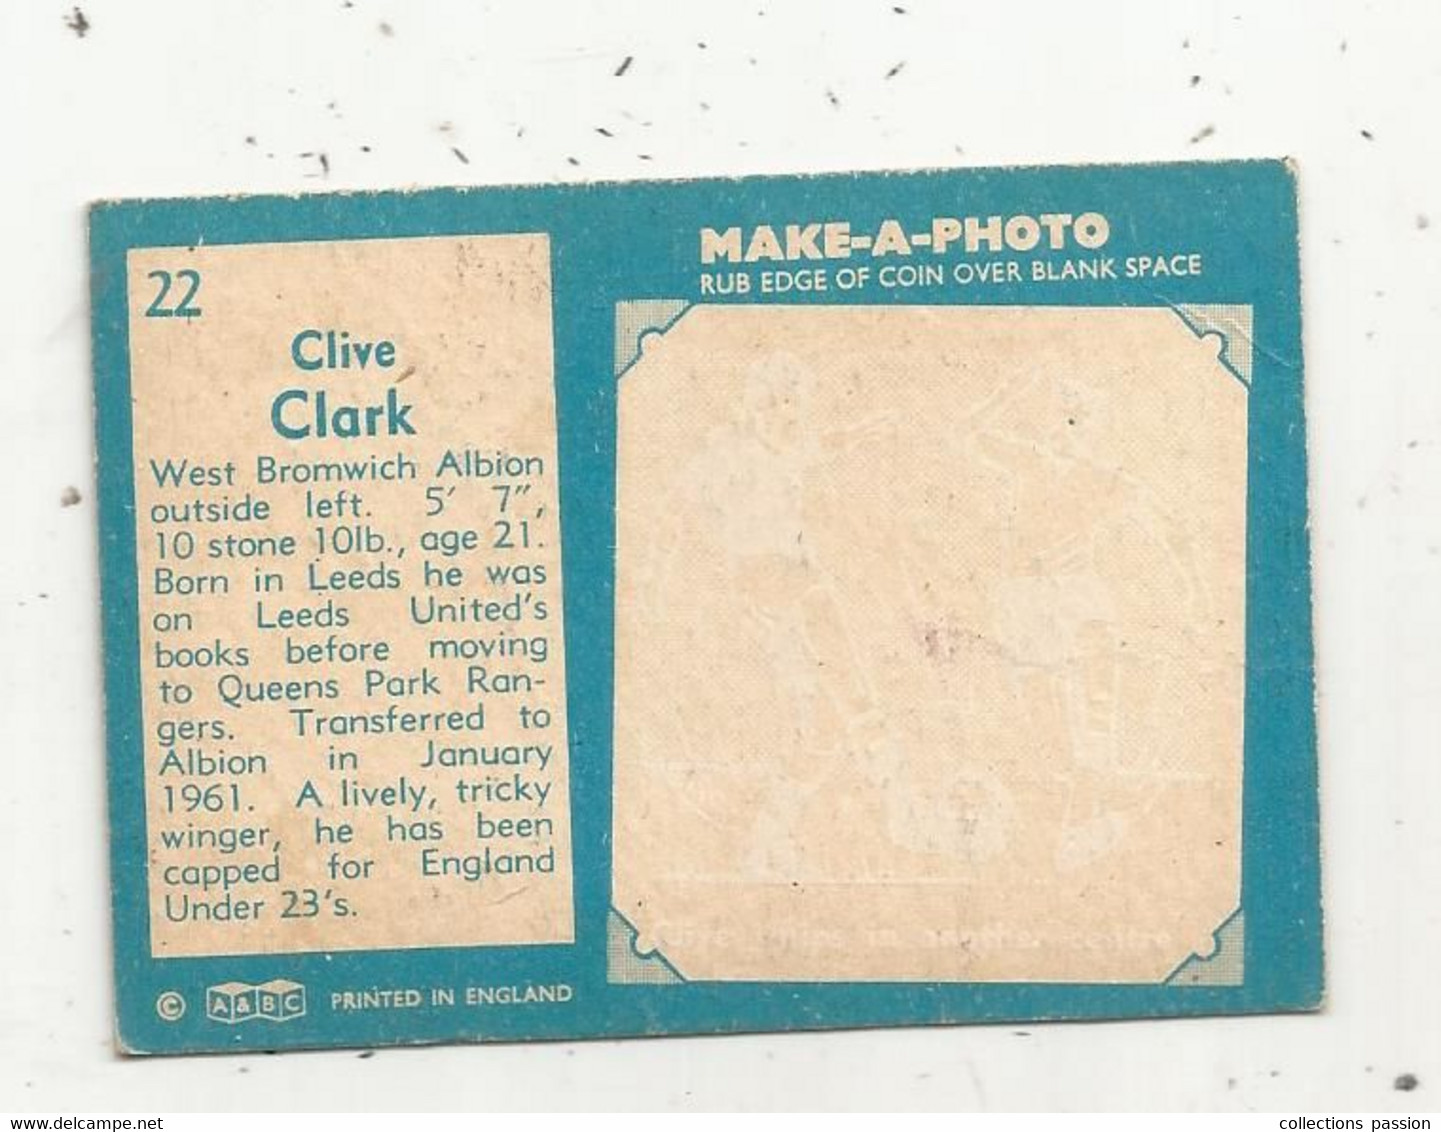 Trading Card , A&BC , England, Chewing Gum, Serie: Make A Photo , Année 60 , N° 22, CLIVE CLARK , West Bromwich Albion - Trading Cards